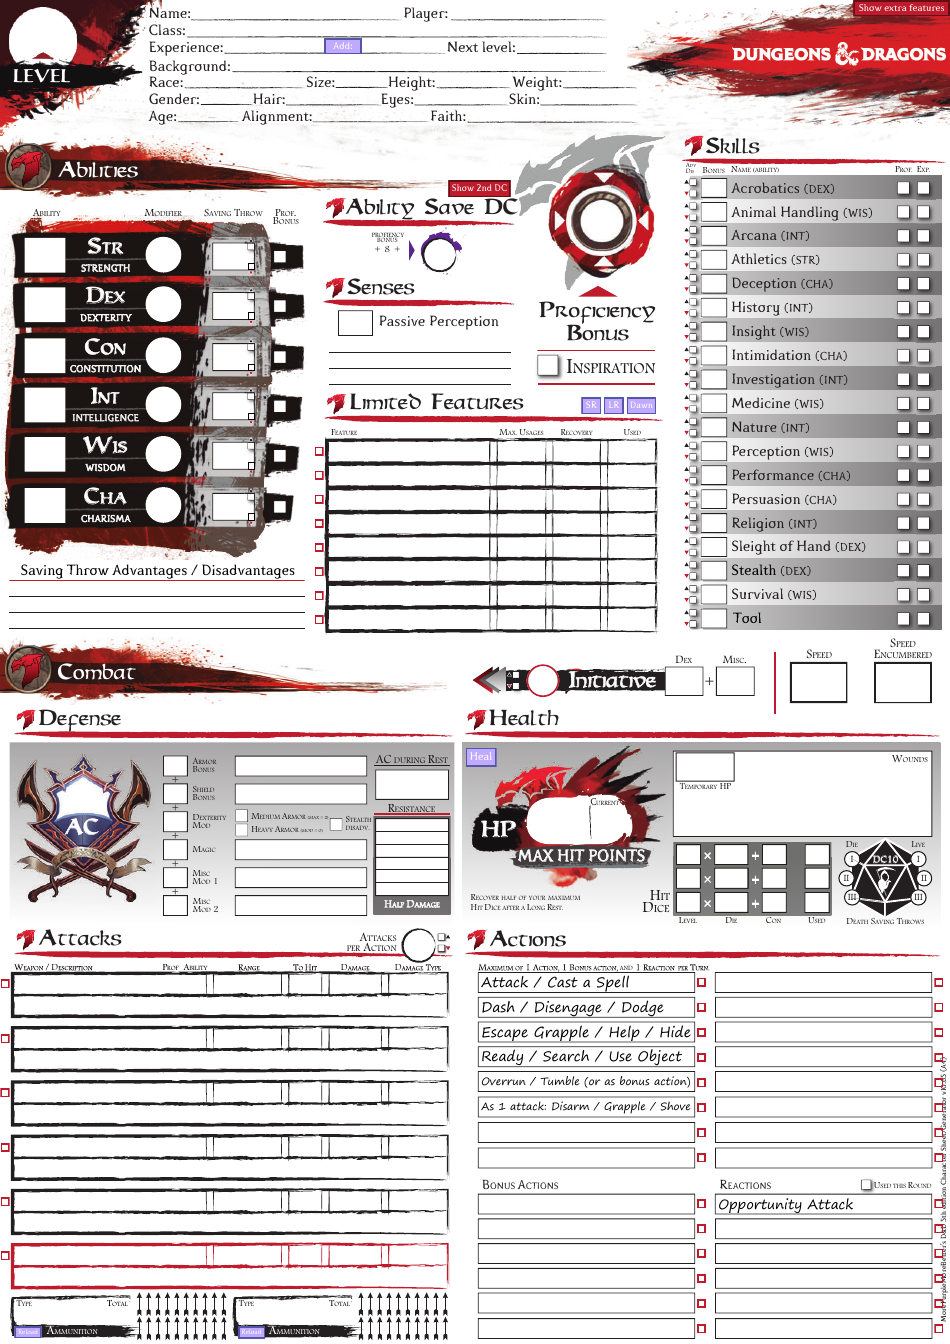 Dungeons & Dragons Gimmicky Character Sheet - Preview Image